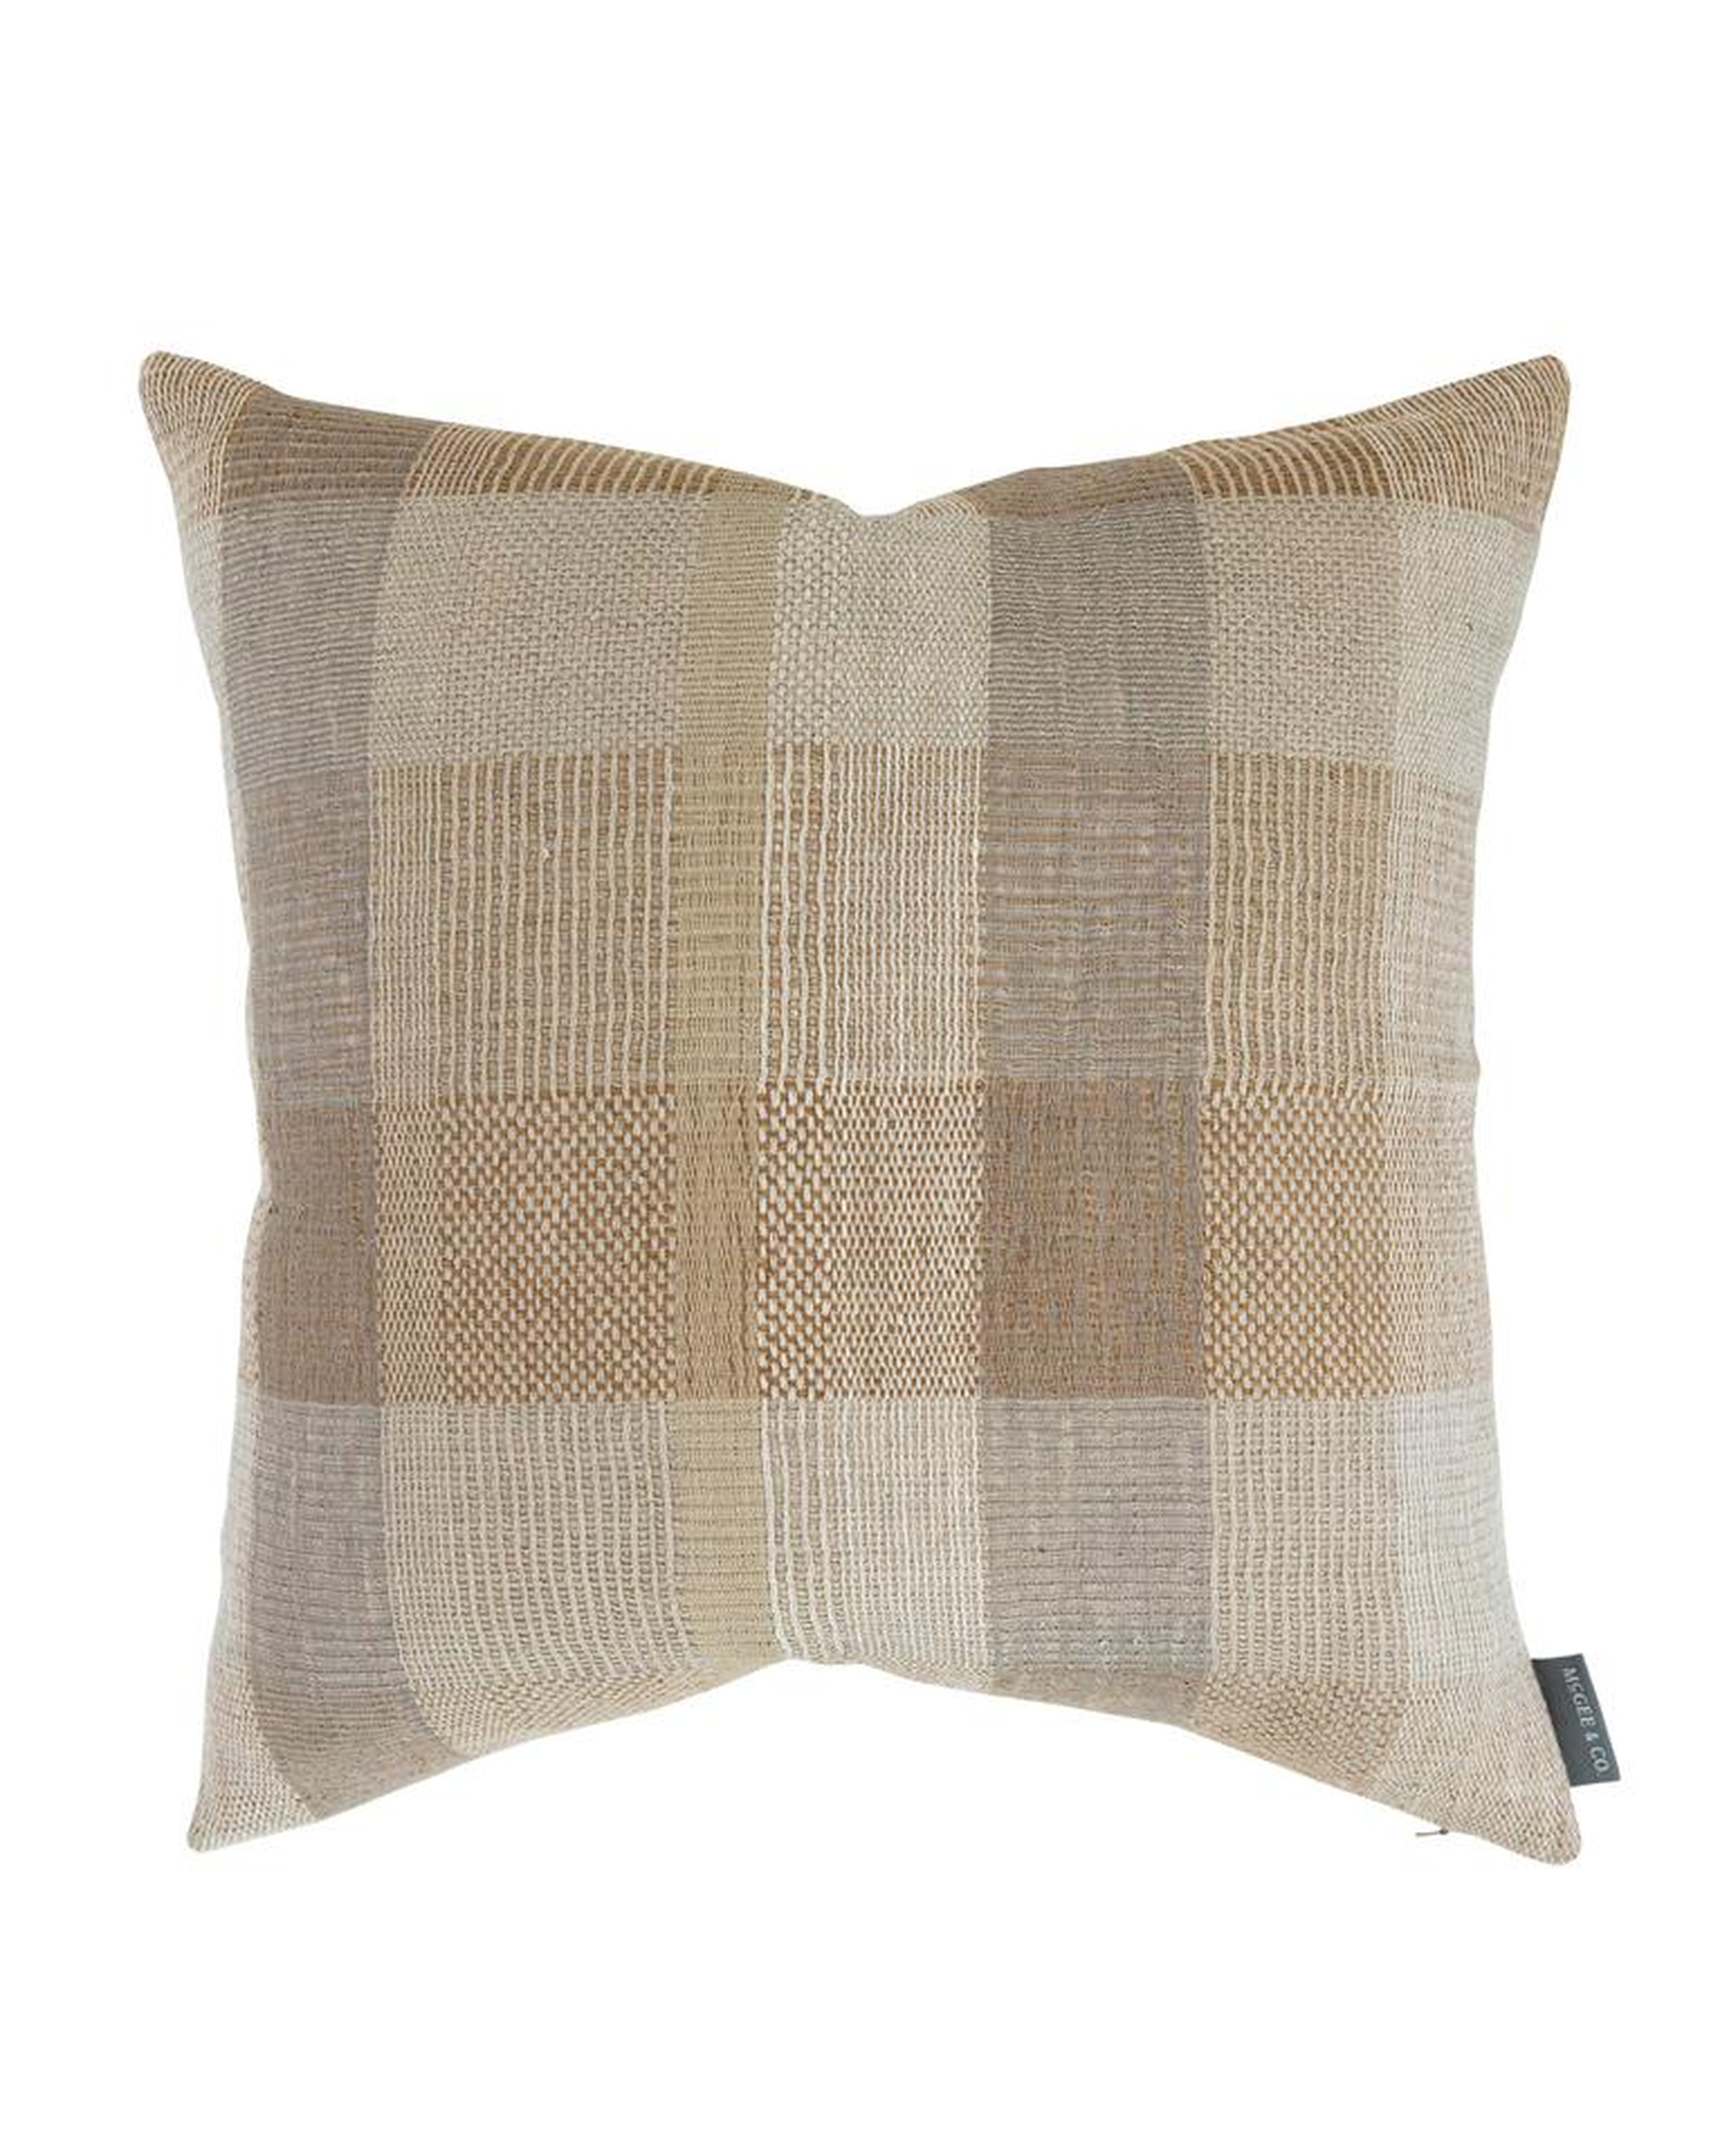 LYDIA BLOCK STRIPE PILLOW COVER - McGee & Co.